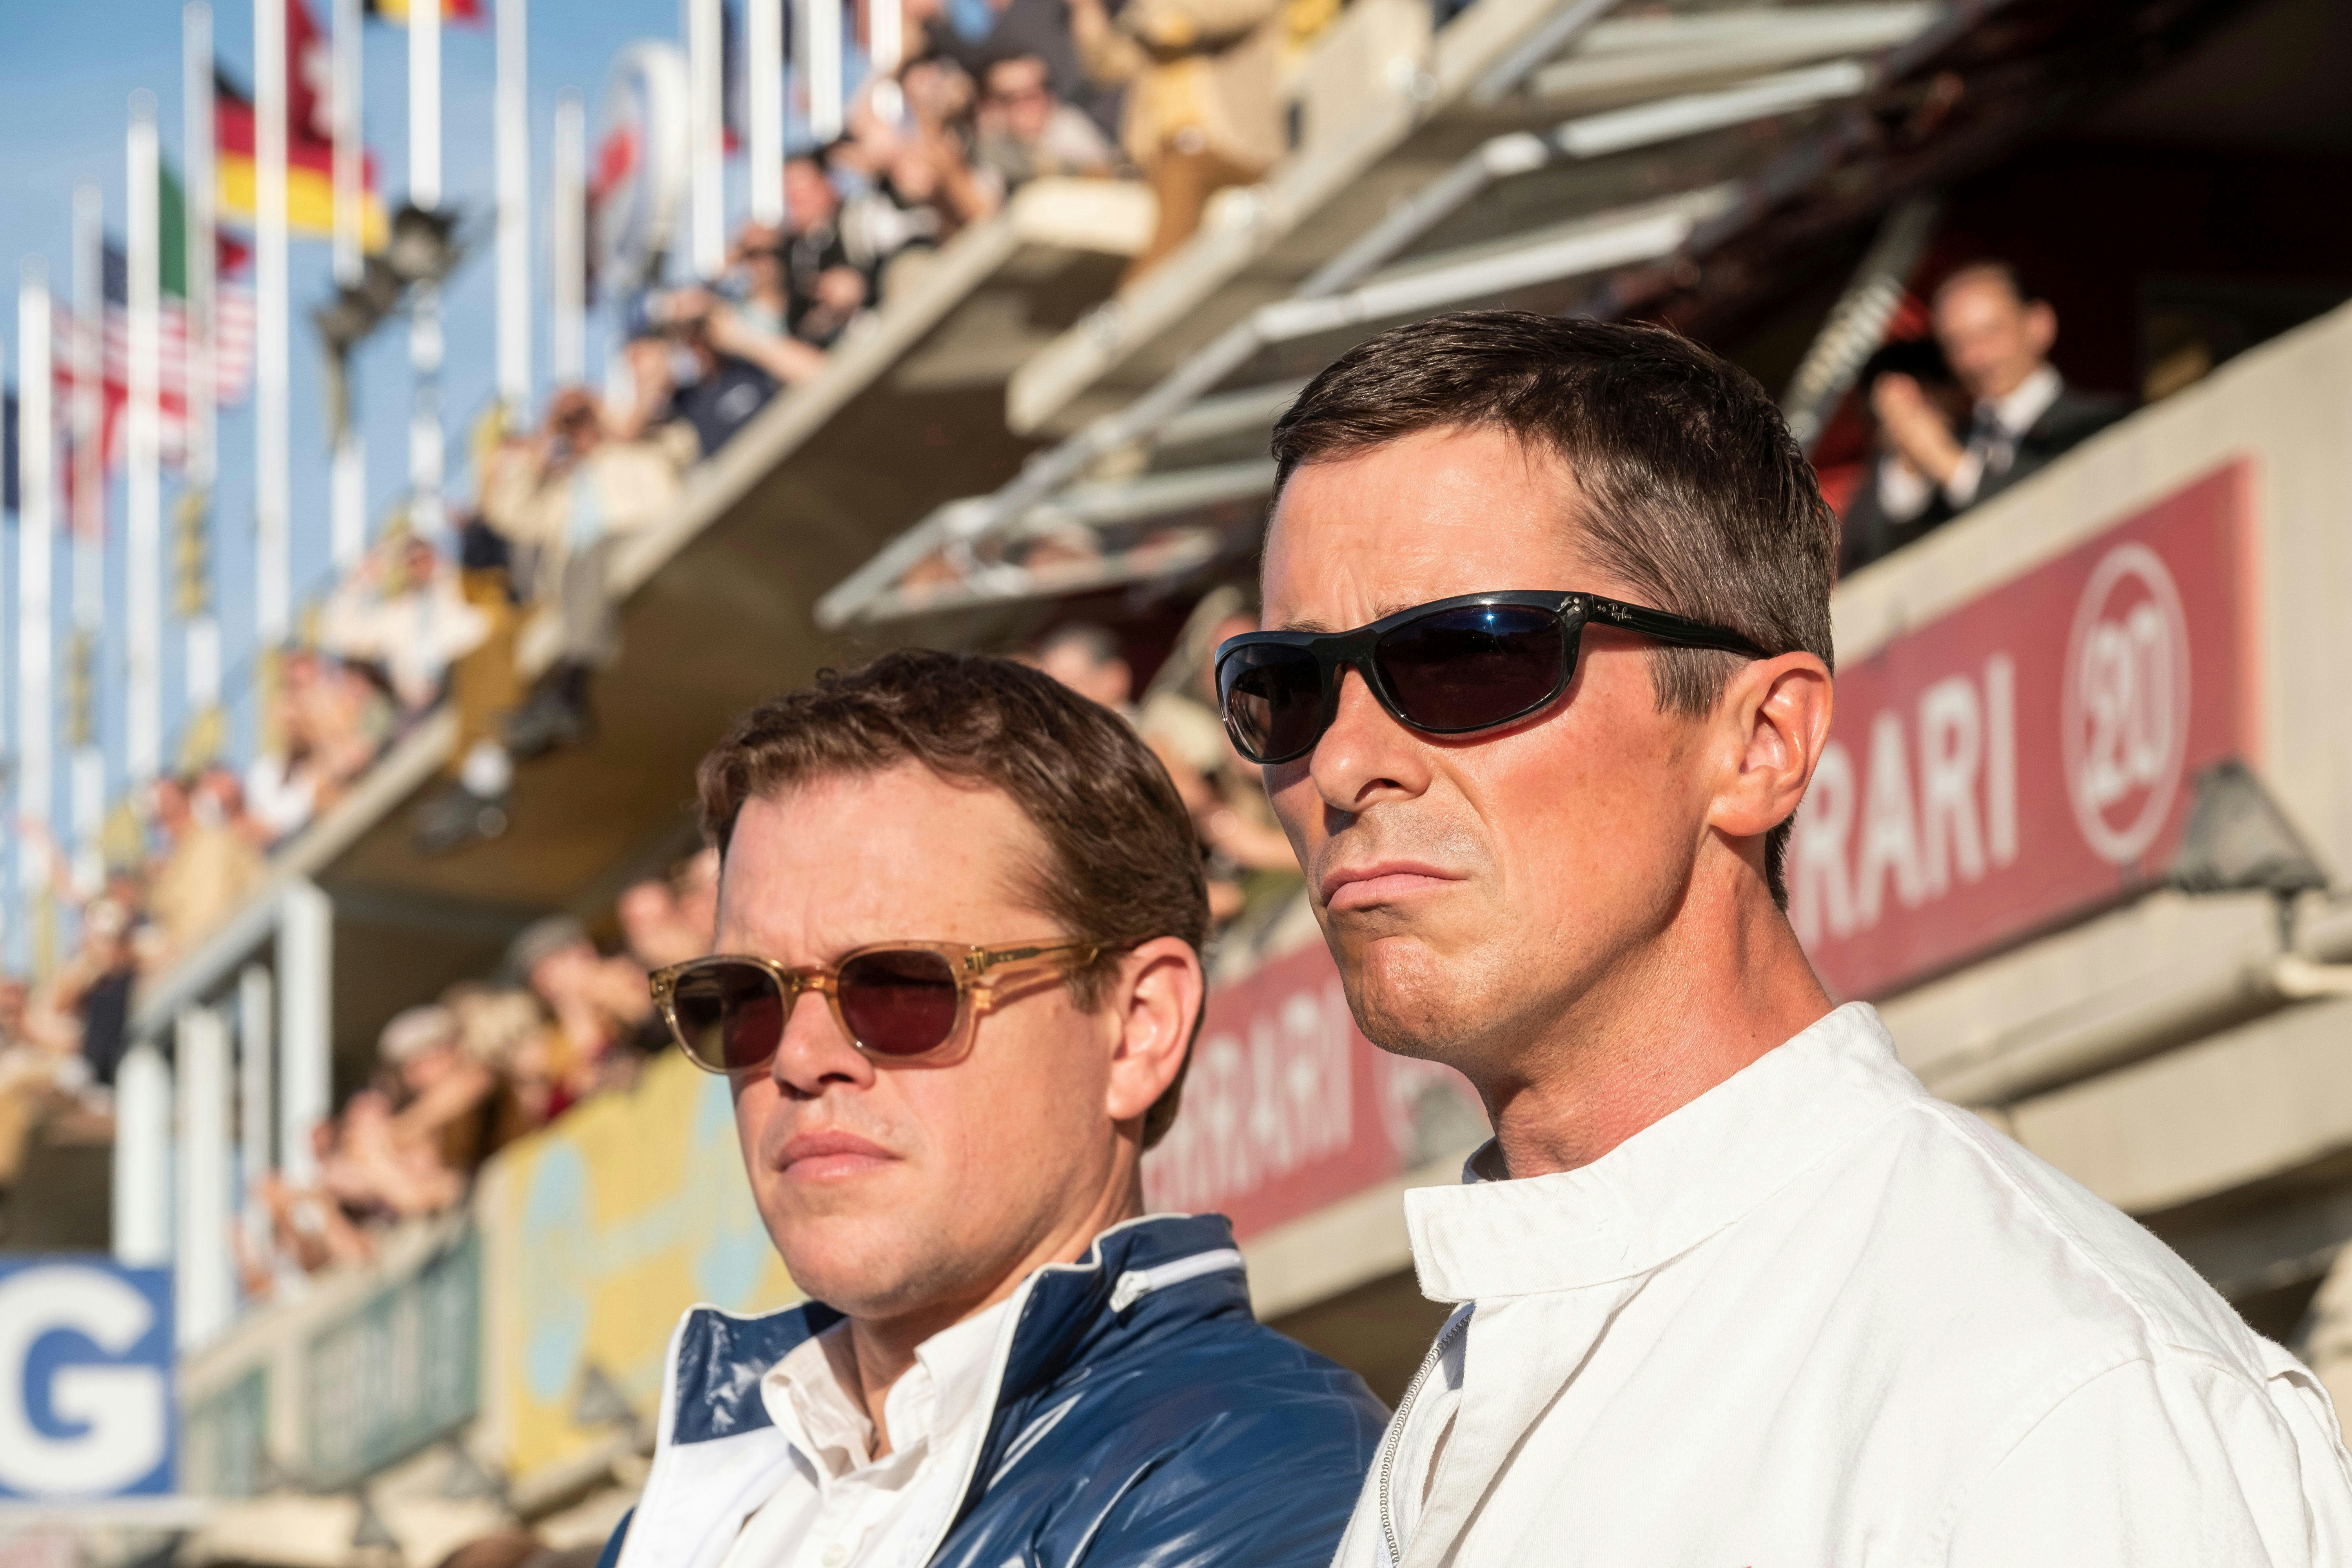 In a scene from the movie 'Ford v Ferrari', Matt Damon and Christian Bale stand side-by-side, looking out of frame, with stands filled with crowds behind them.